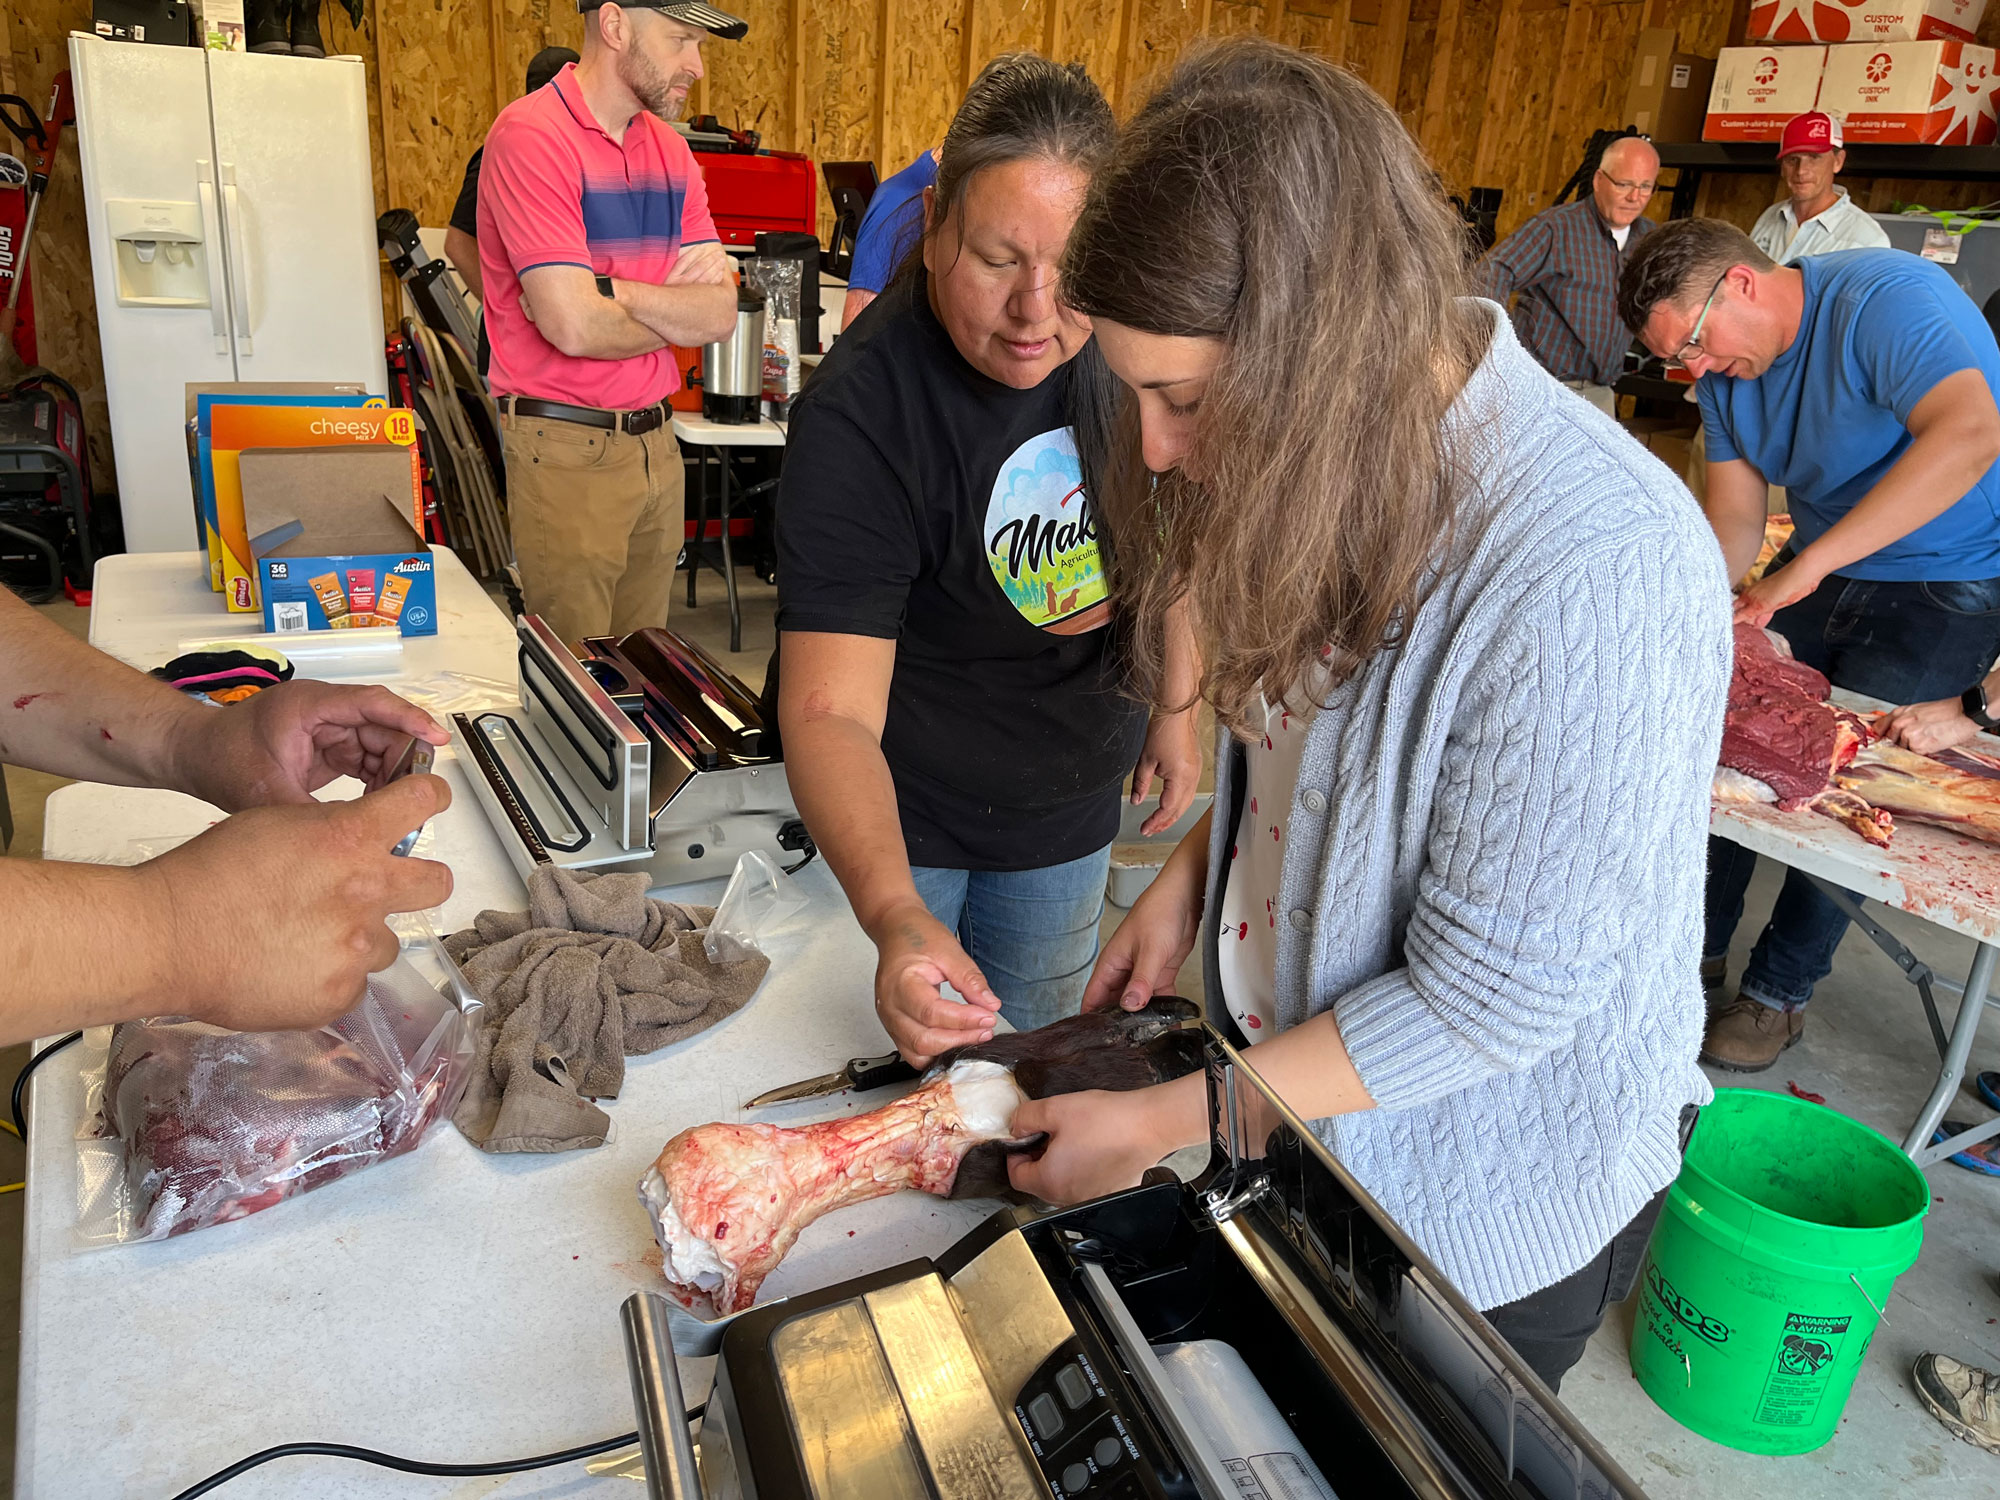 FNS Senior Policy Advisor Ali Hard participated in a traditional buffalo harvest with members of the Oglala Sioux tribe, FNS Mountain Plains Region staff, and staff from the USDA Food Safety and Inspection Service